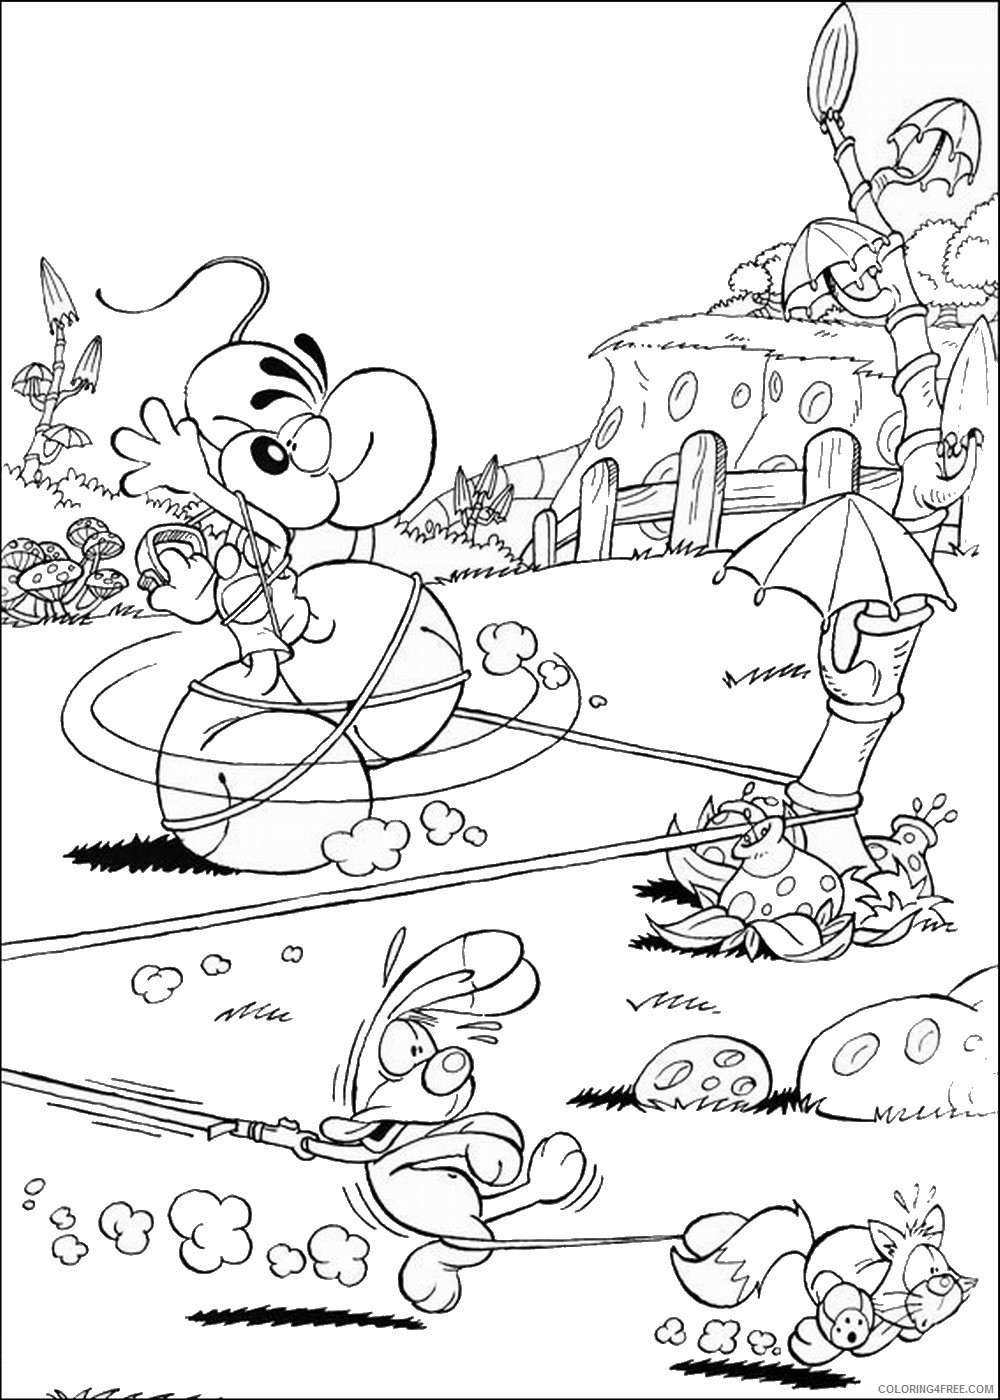 Diddl Coloring Pages Cartoons diddl_coloring2 Printable 2020 2055 Coloring4free